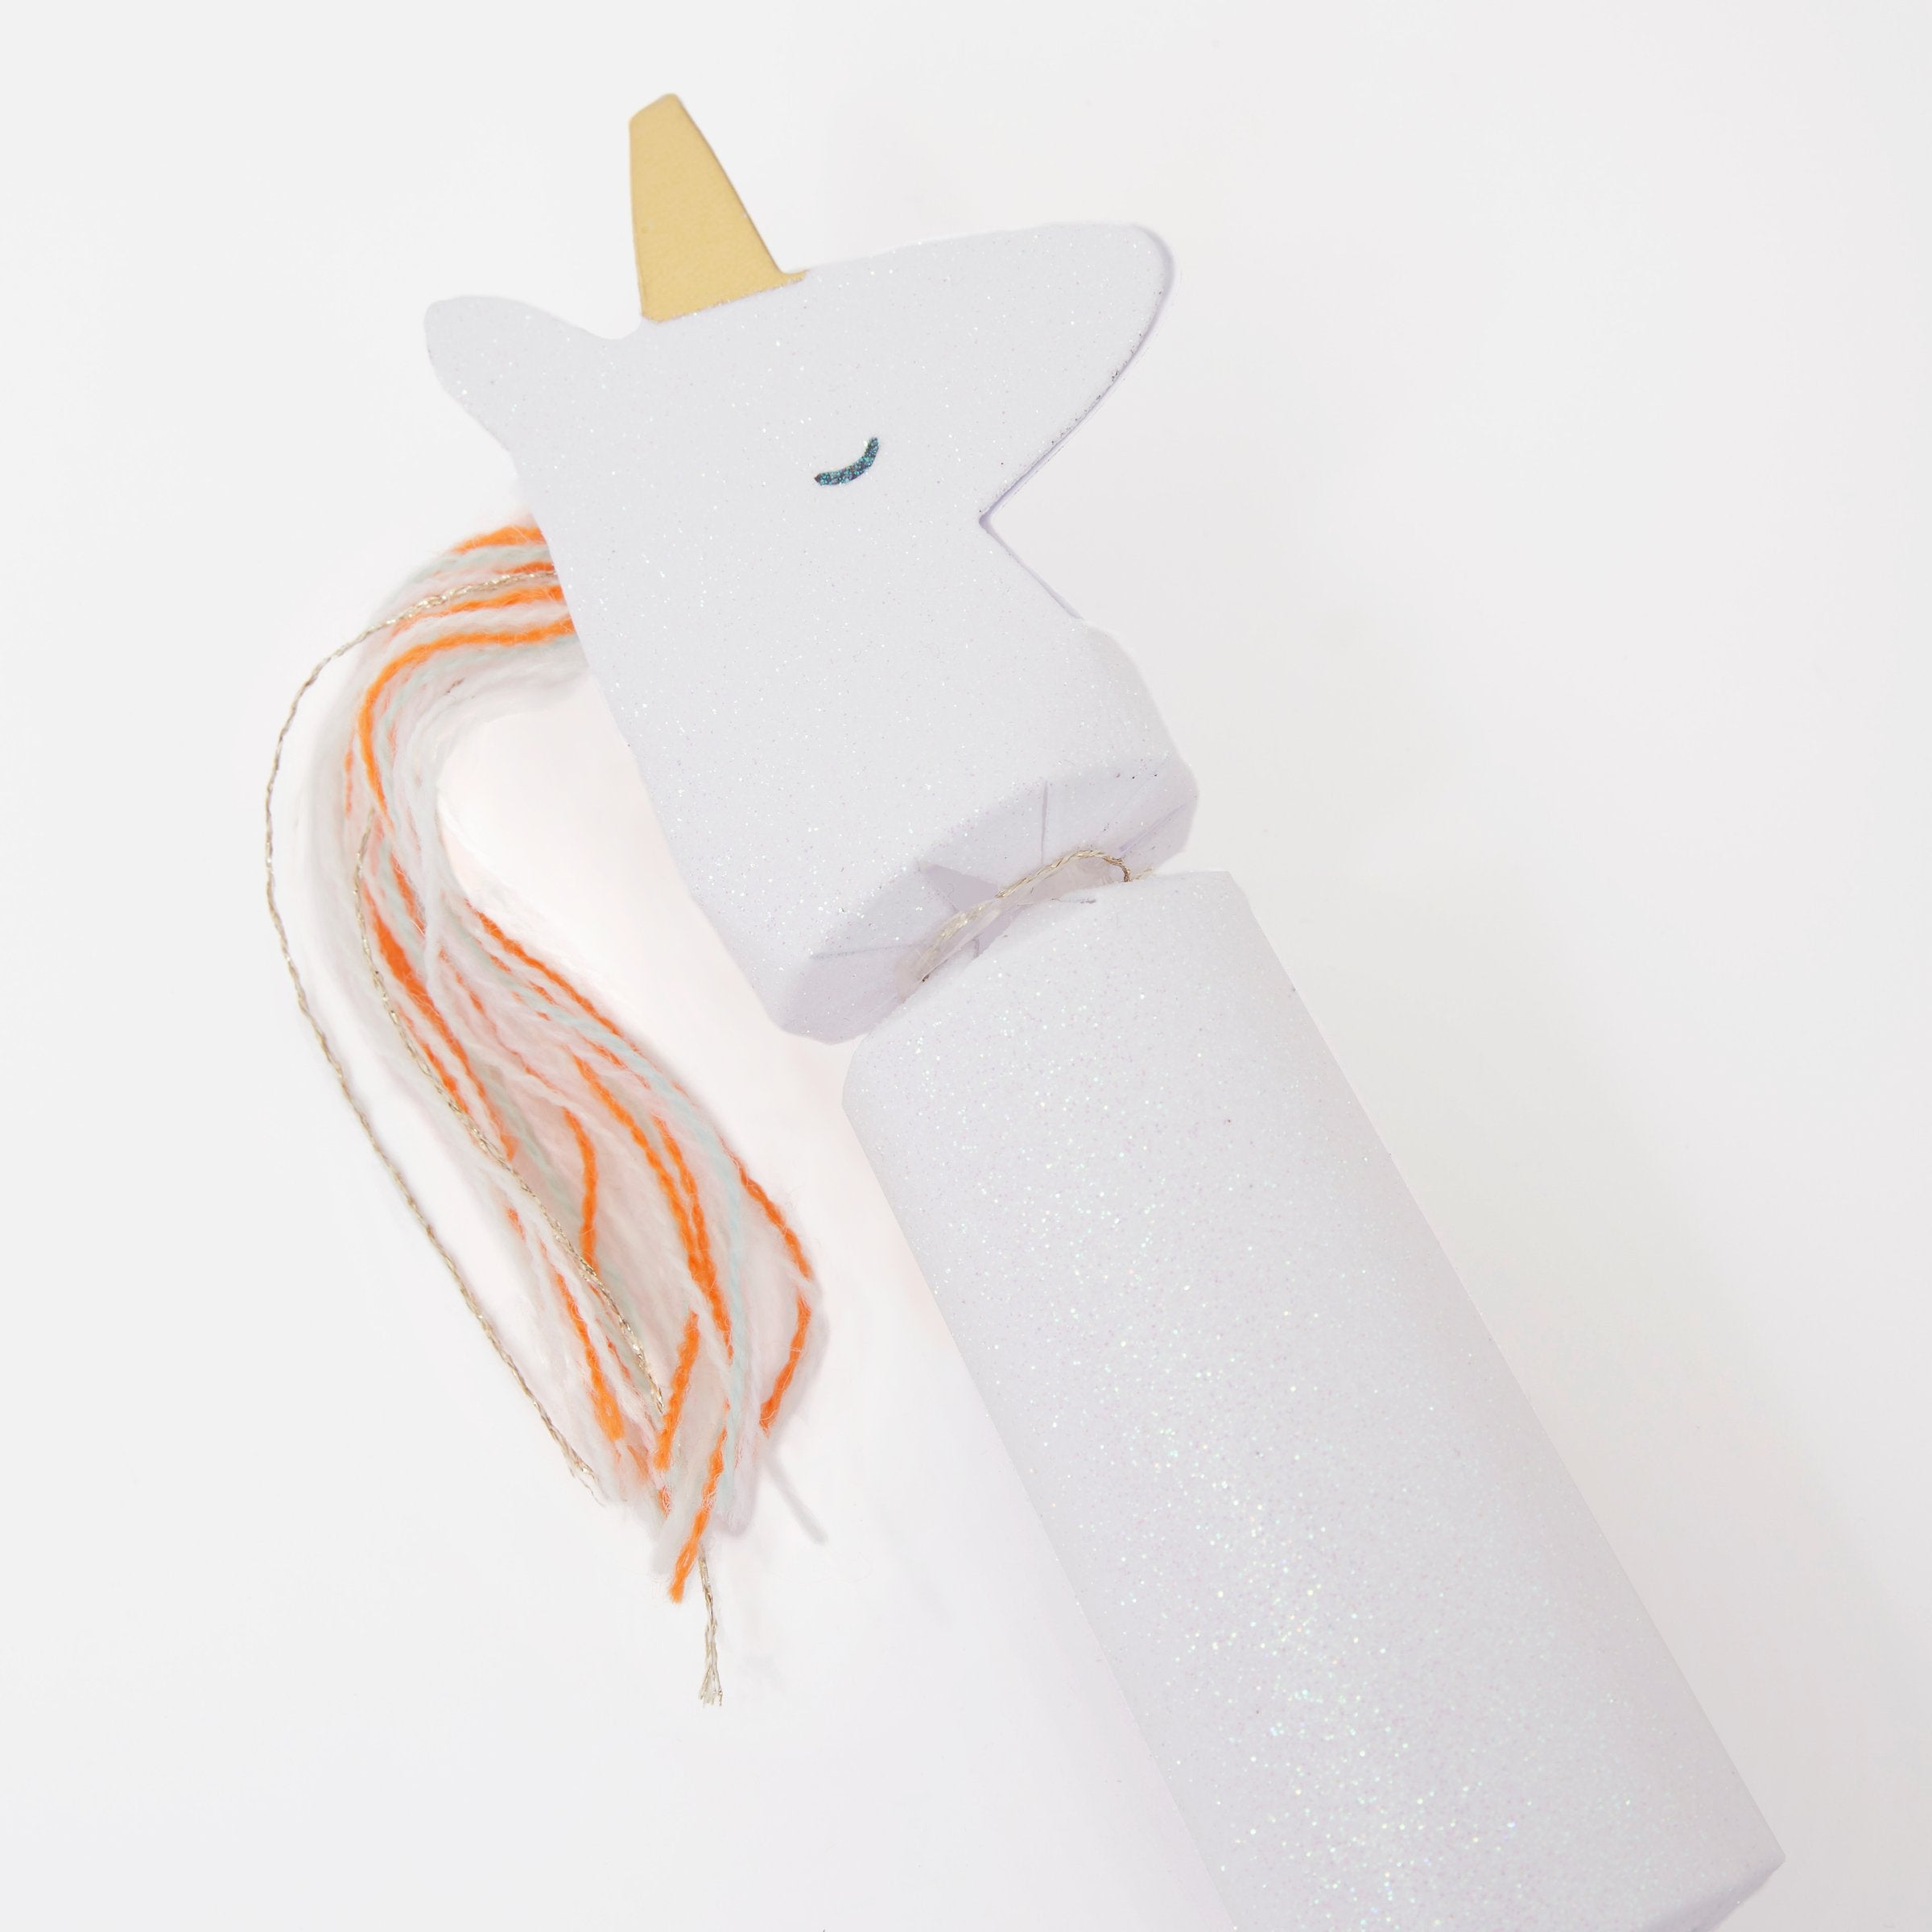 These unicorn party crackers have crystal glitter and gold foil detail, with a yarn tassel mane and tail.